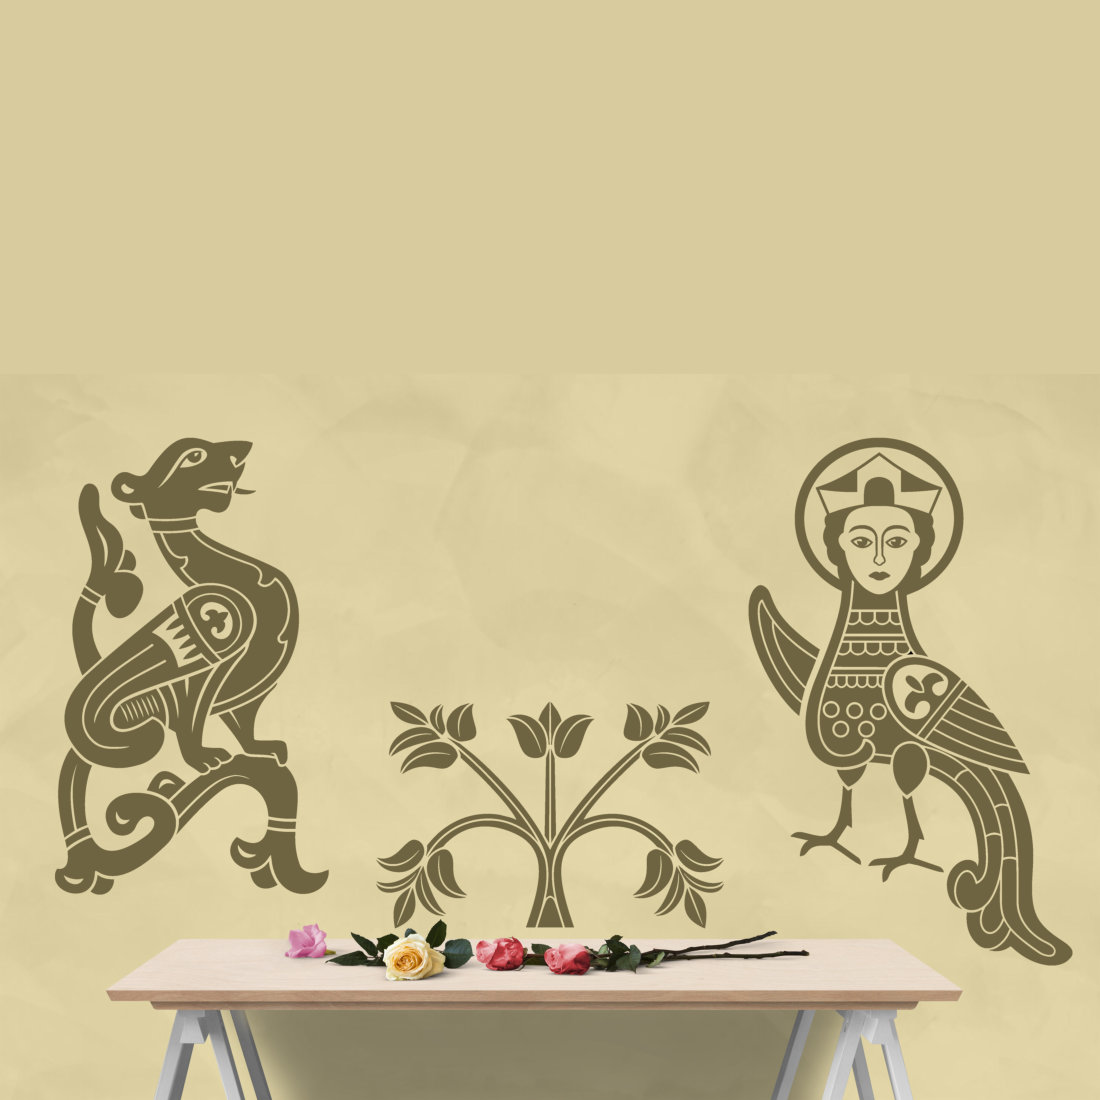 Table with a vase and two birds on it.